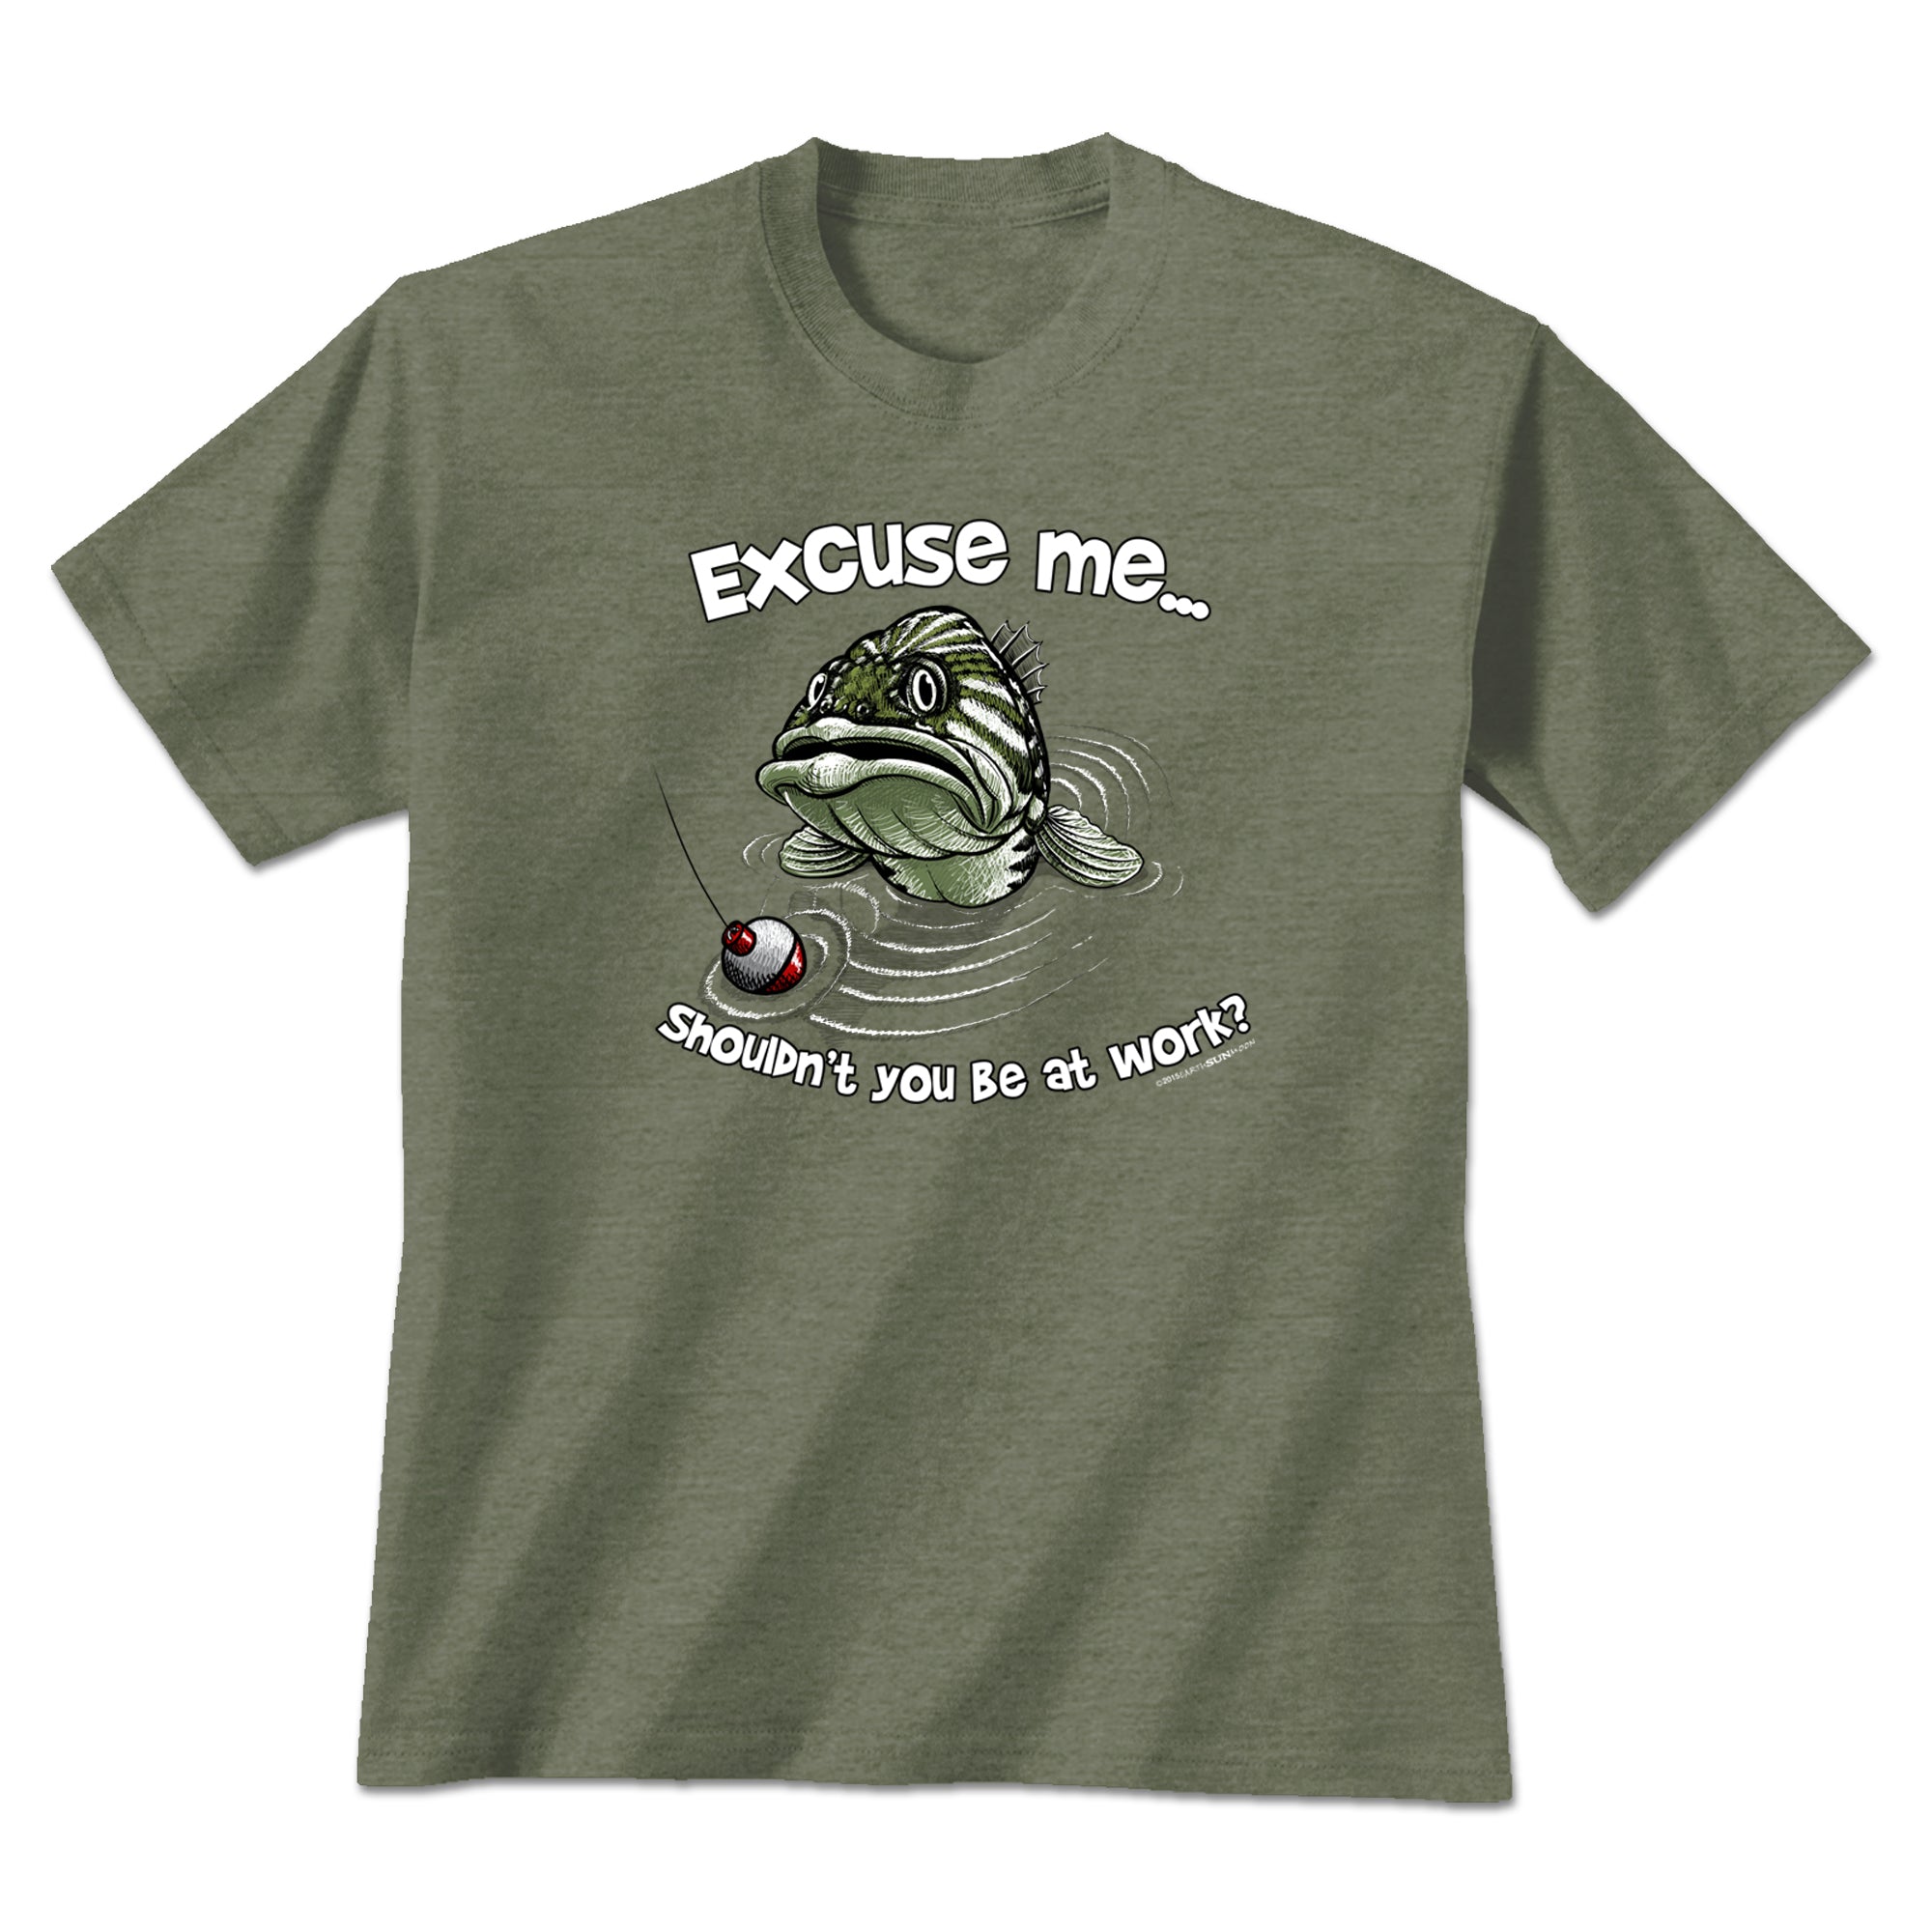 Earth Sun Moon Excuse Me Fish T-Shirt - Heather Military Green - L